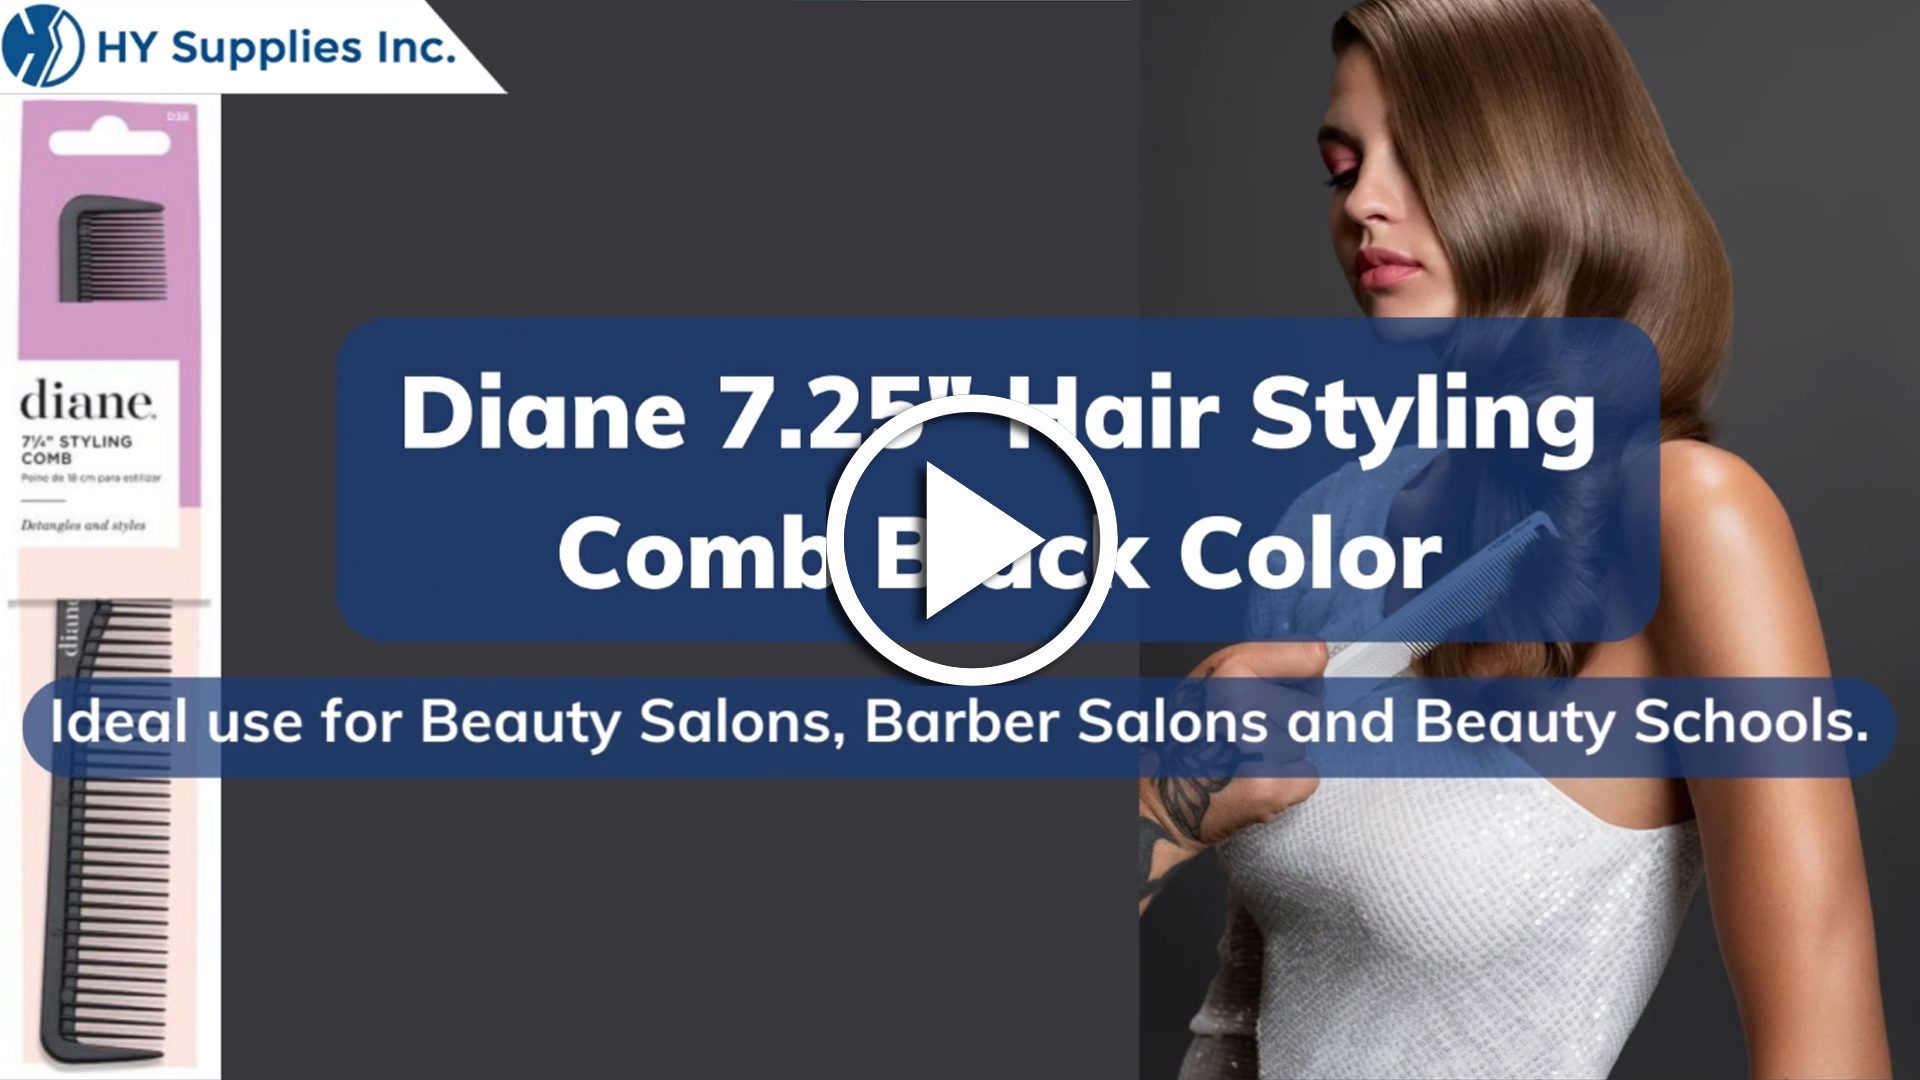 Diane 7.25" Hair Styling Comb Black Color